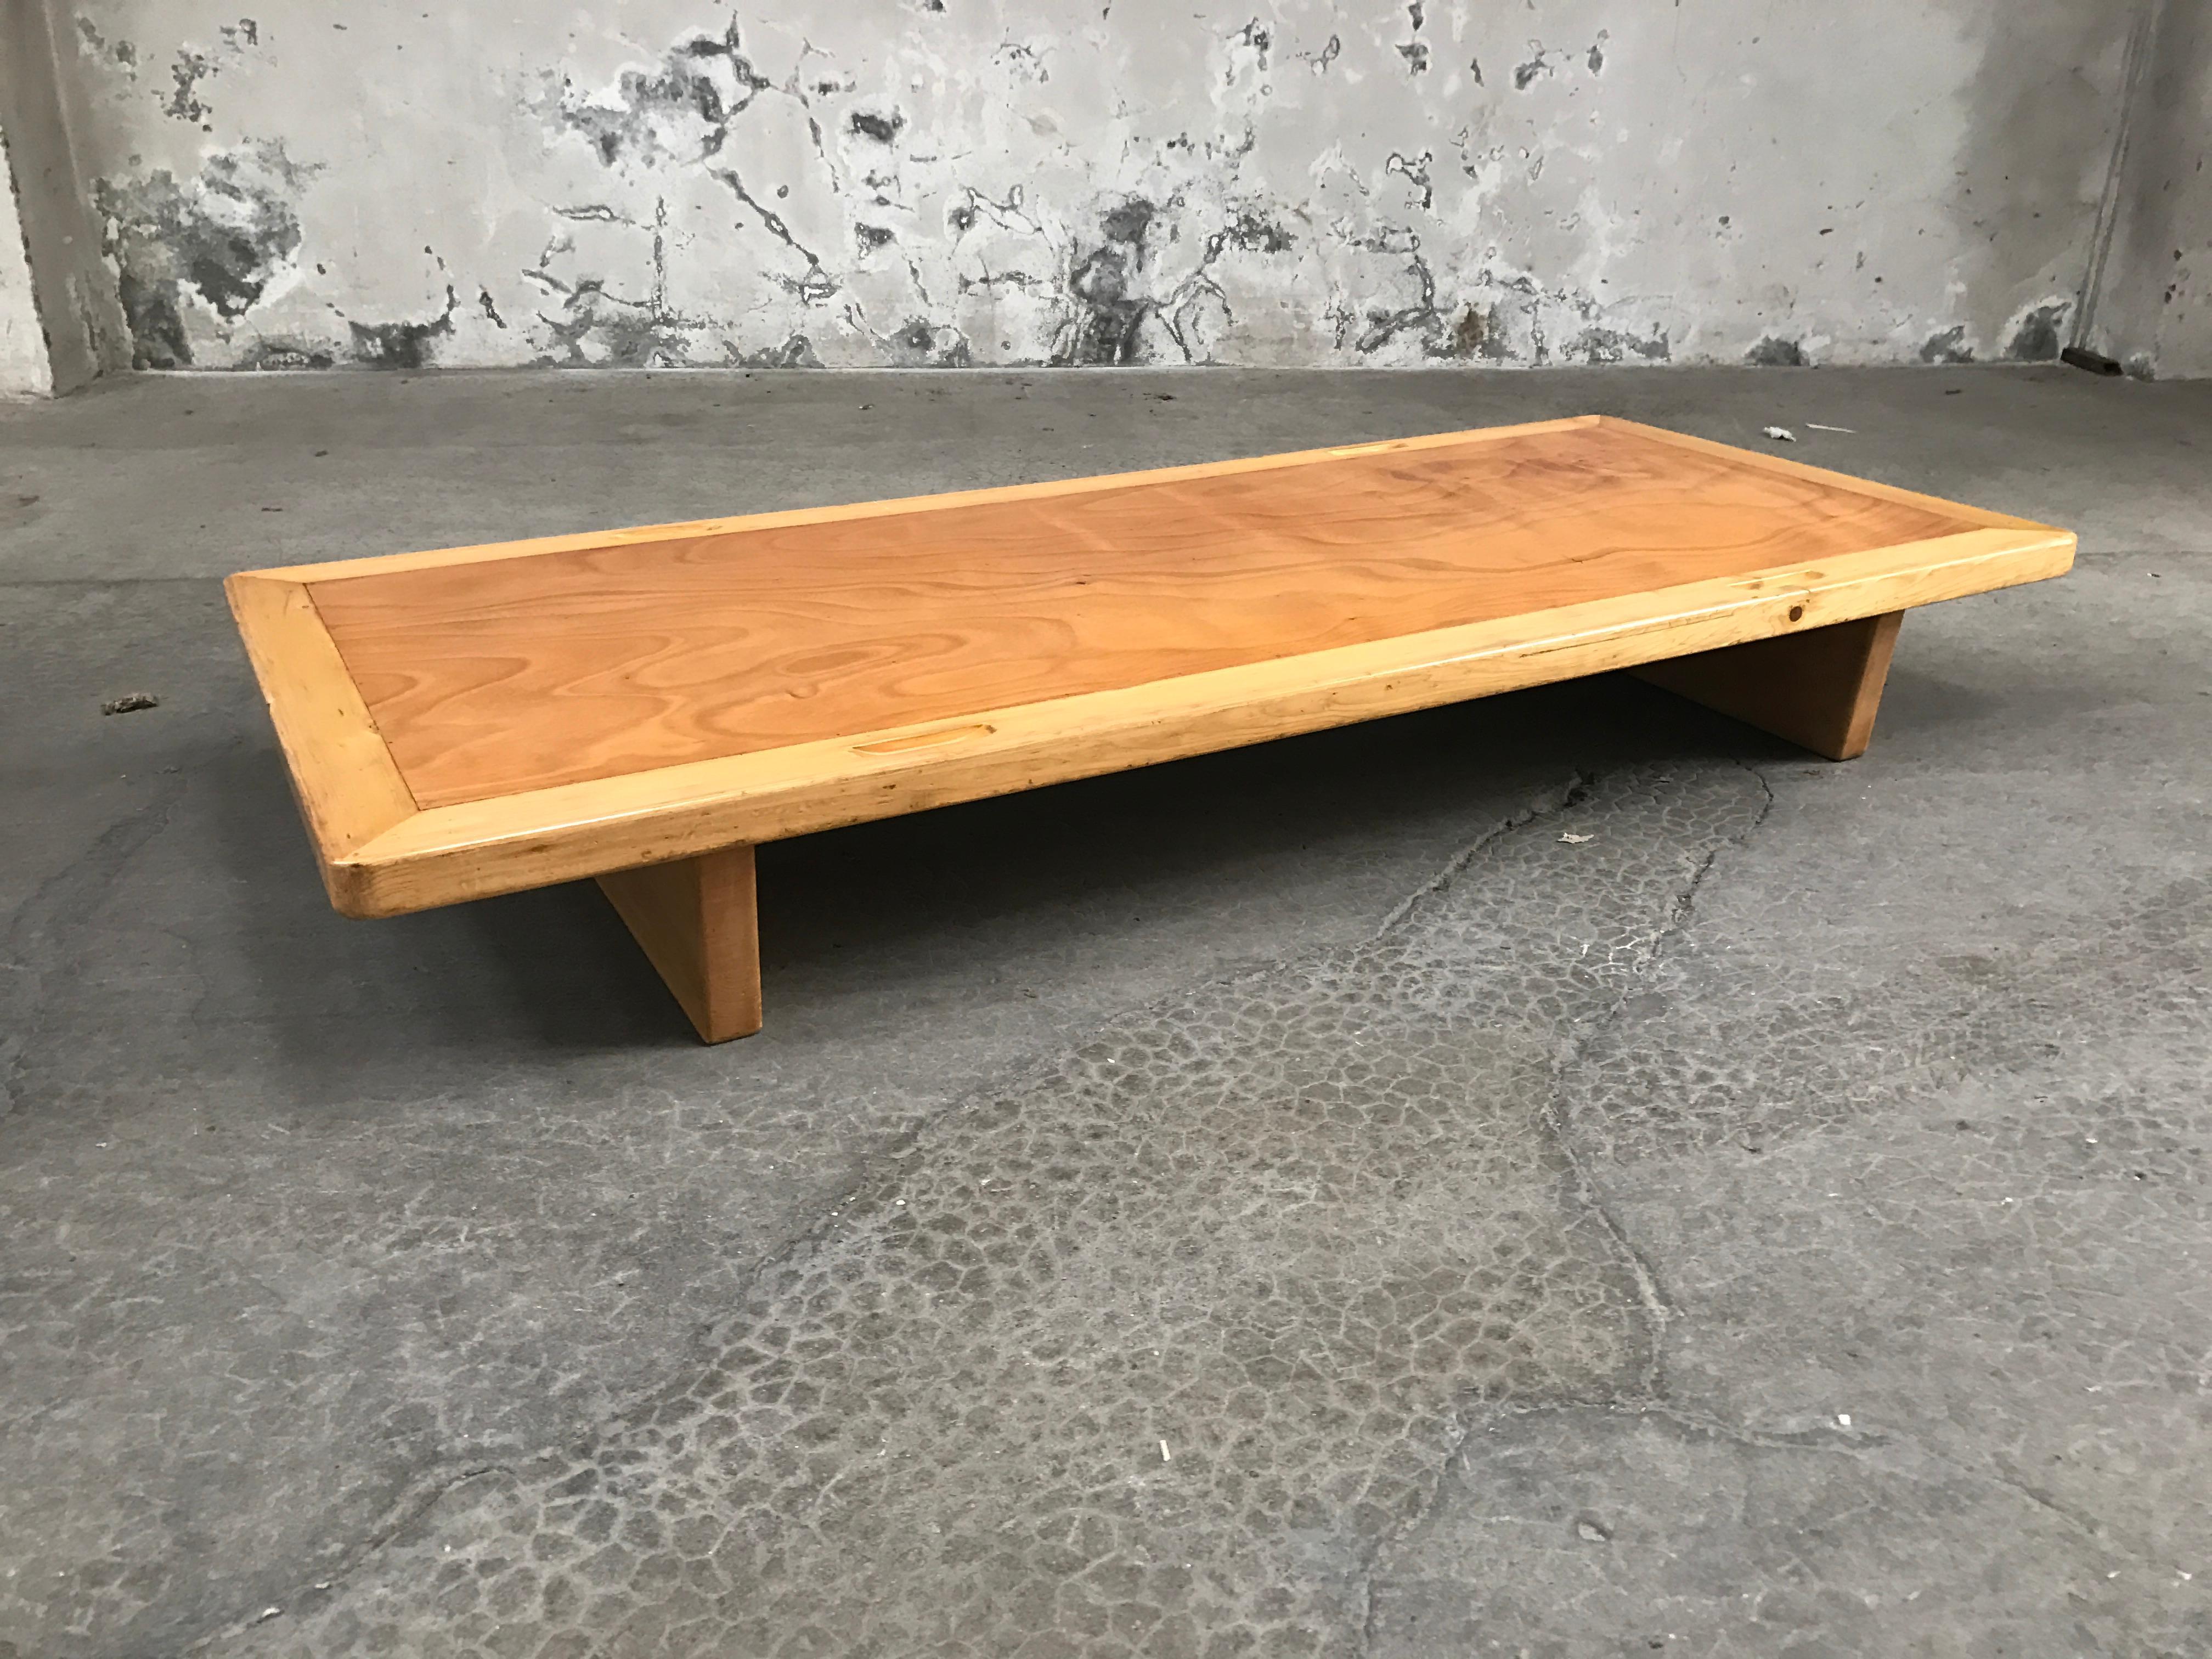 Charlotte Perriand's beautiful daybed for the Méribel les Allues ski resort in the French Alps.
Construction in pine and mahogany Good state of conservation, authentic piece of the 1950s.
 